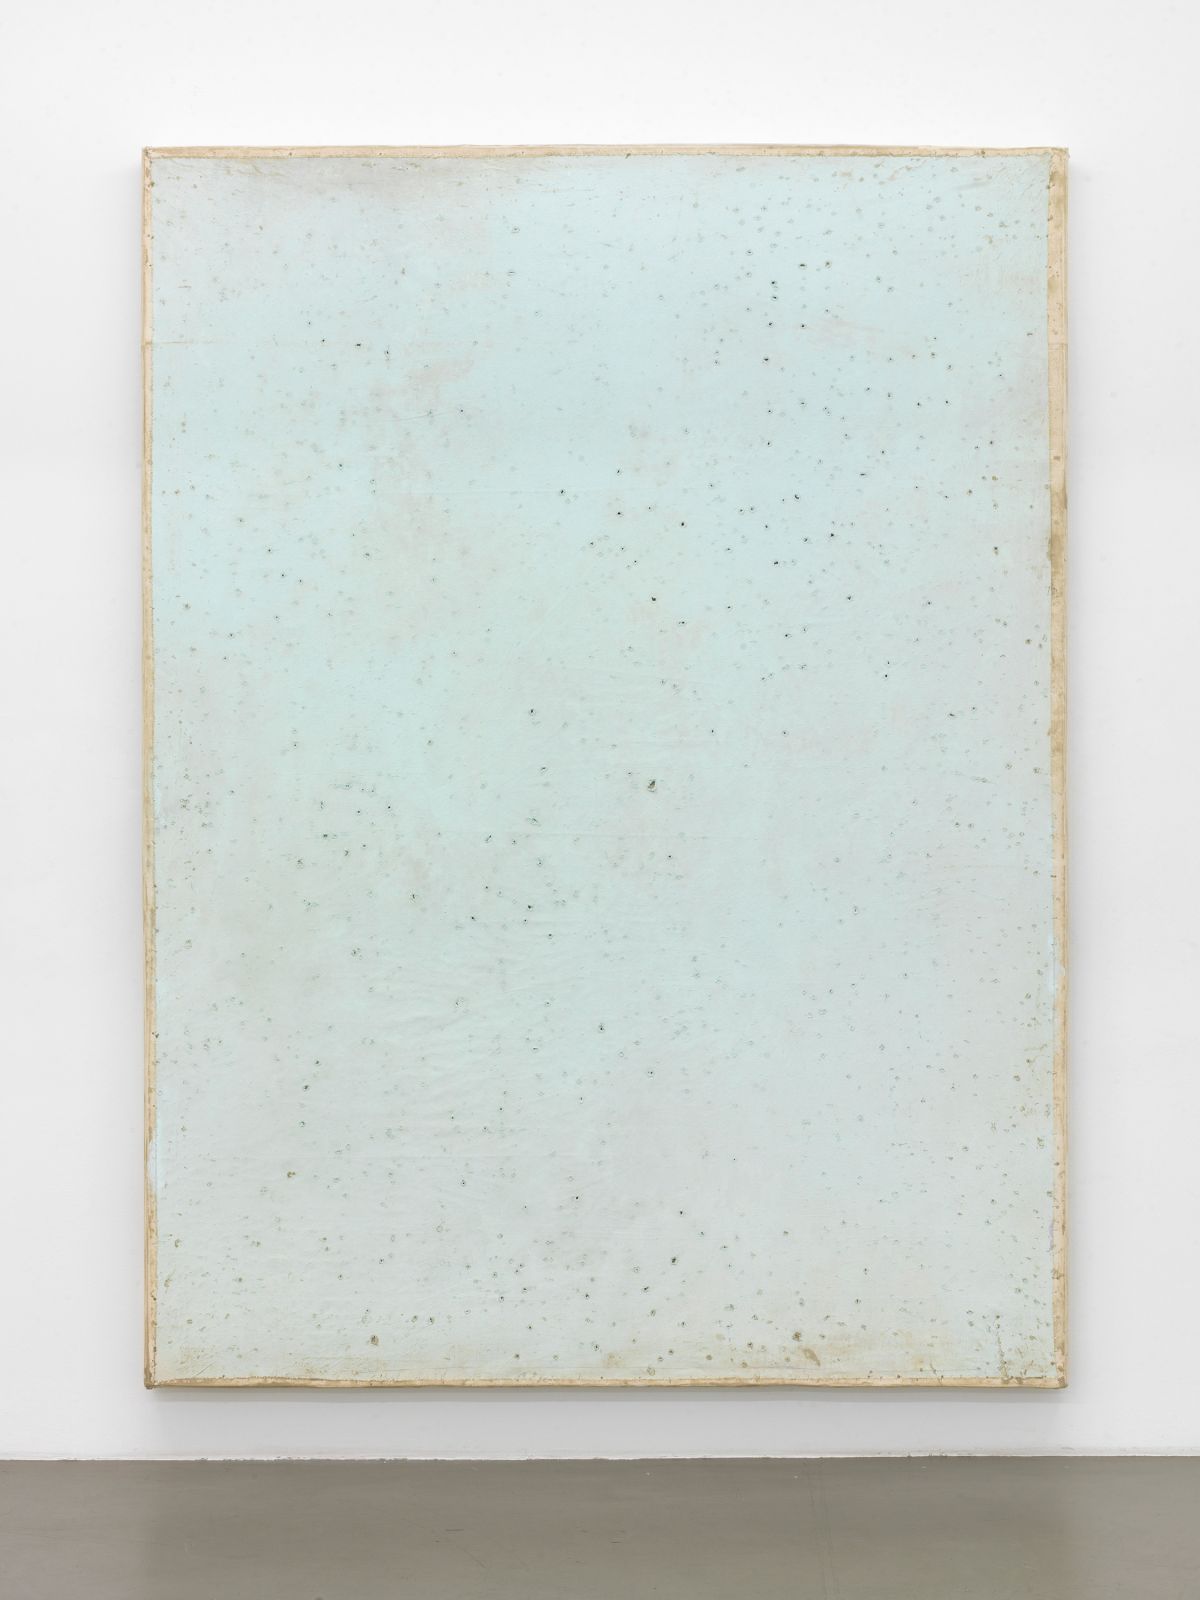 Lawrence Carroll, ‘Untitled’, 2016, Oil, wax, house paint, canvas, staples on wood